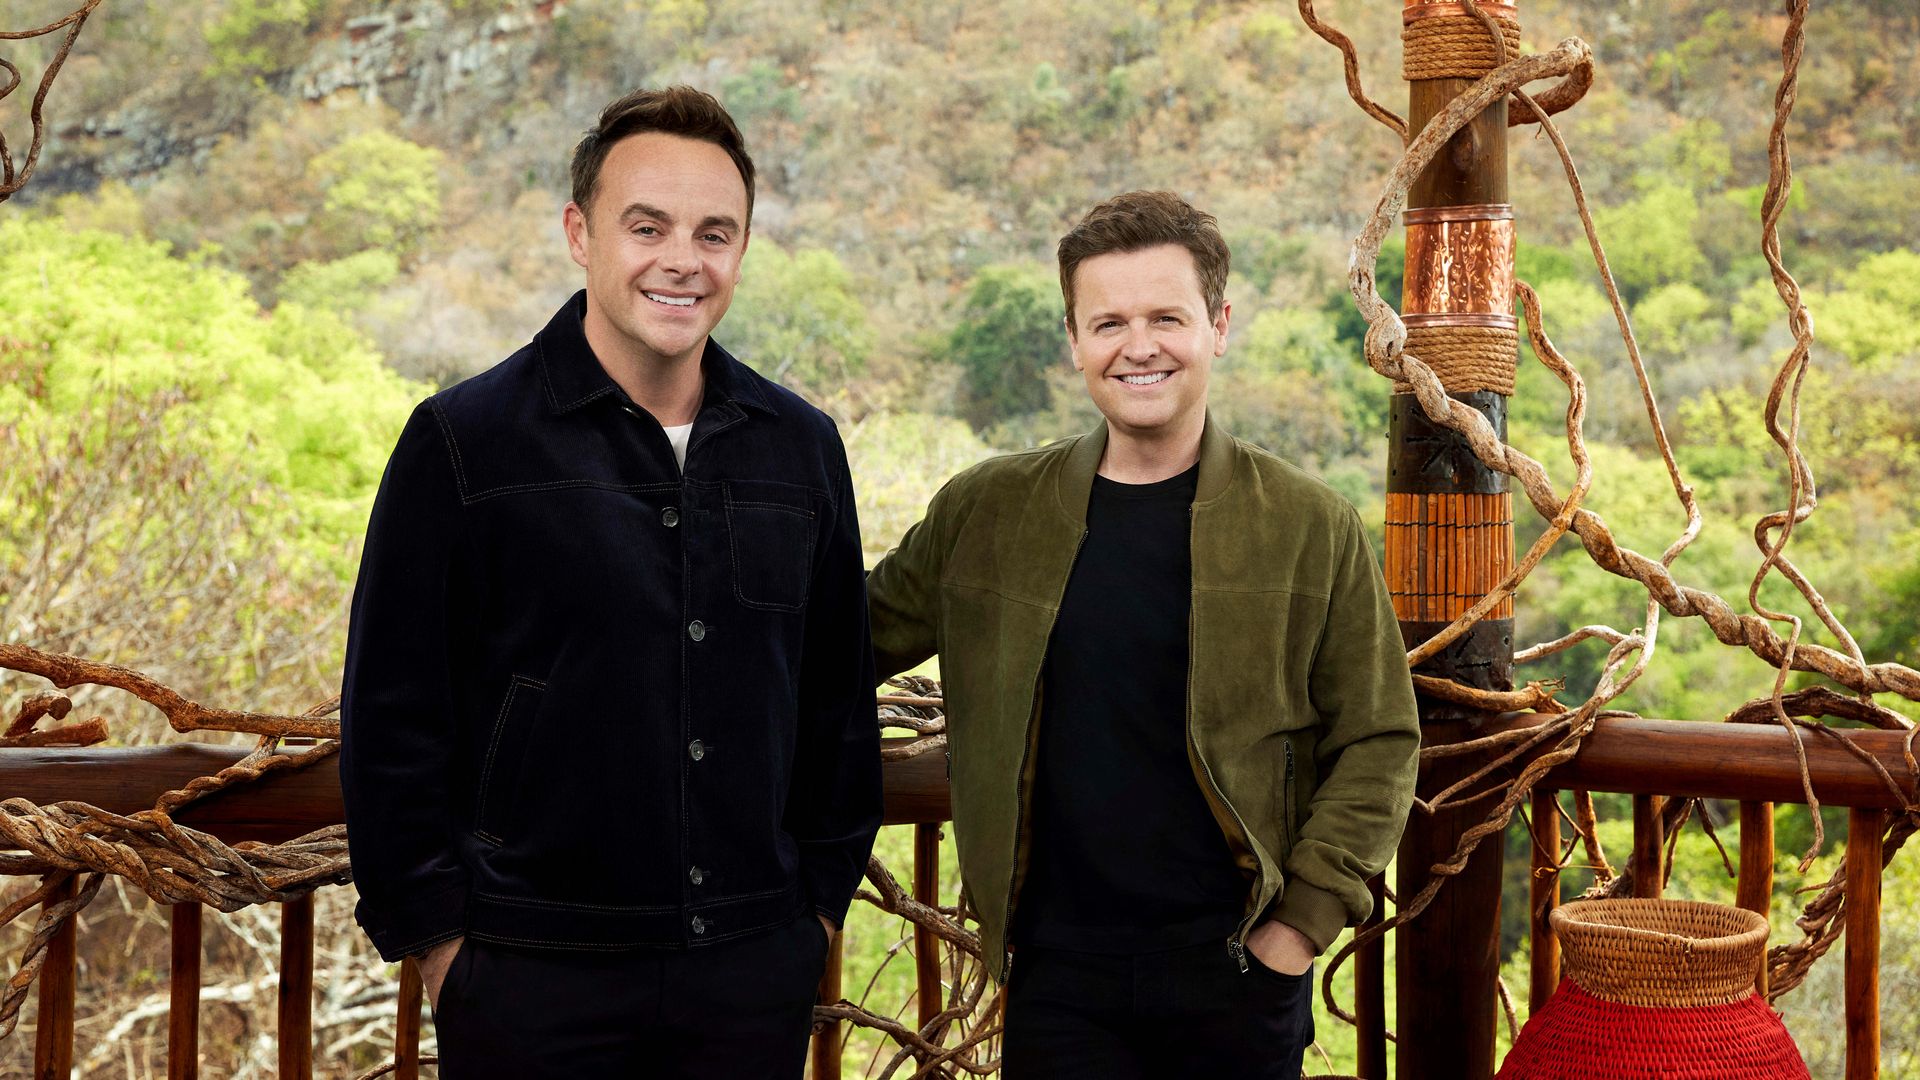 How much are Saturday Night Takeaway stars Ant and Dec worth?